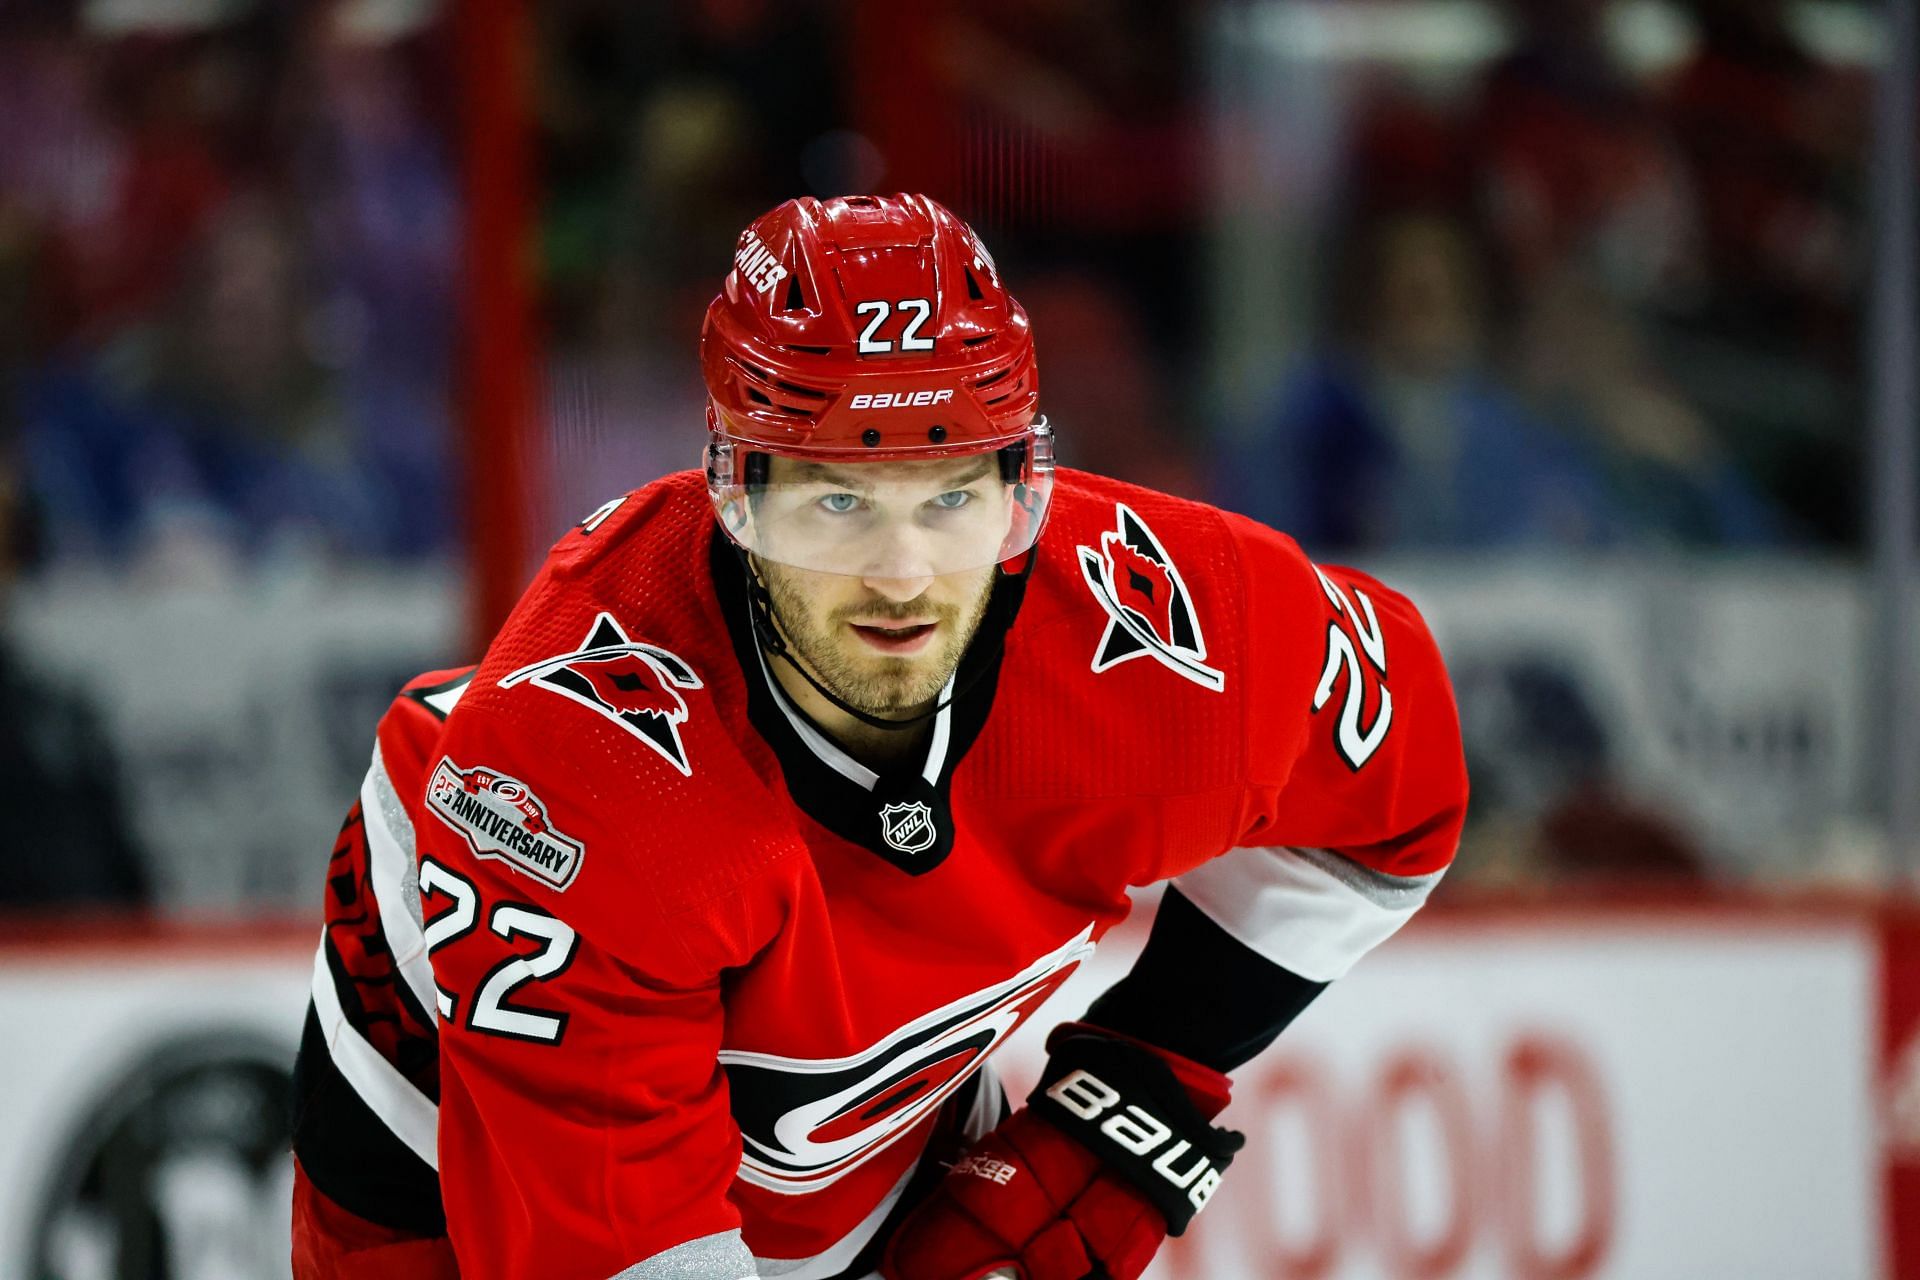 The roster is set! - Carolina Hurricanes